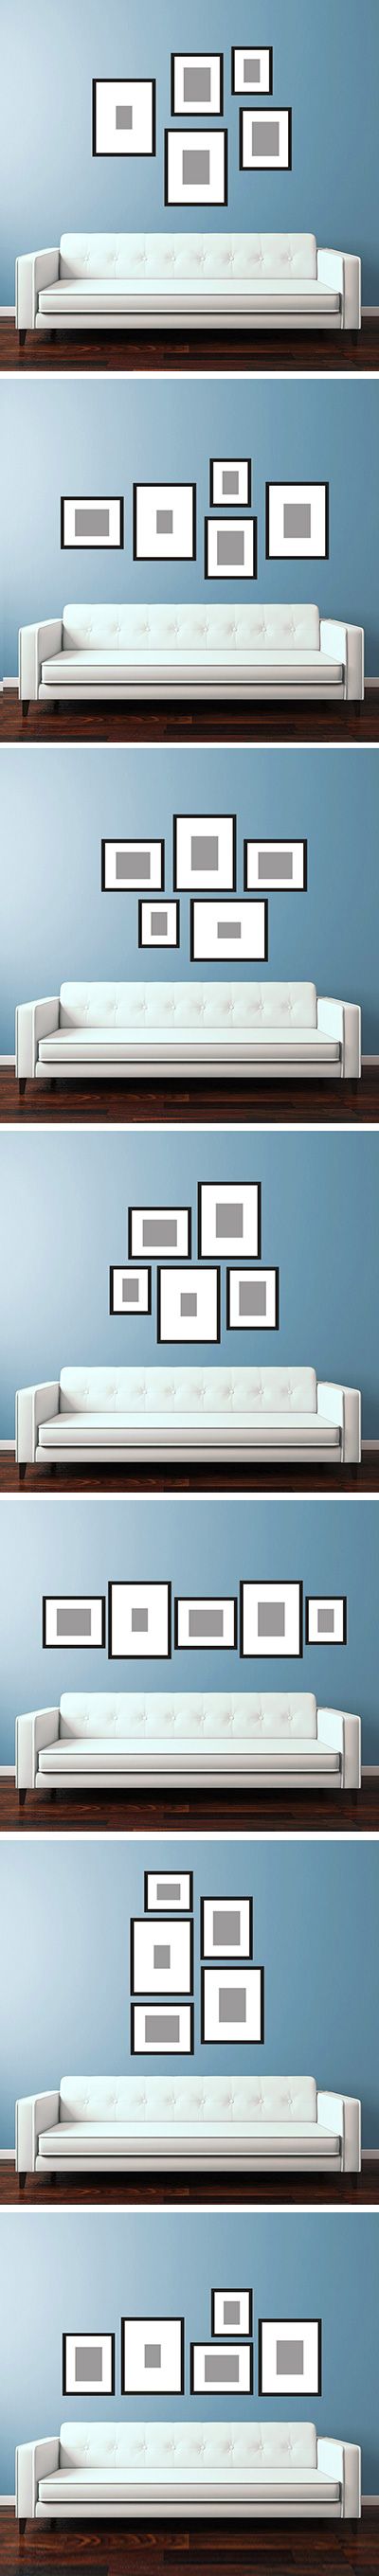 picture wall layouts to hang above your sofa